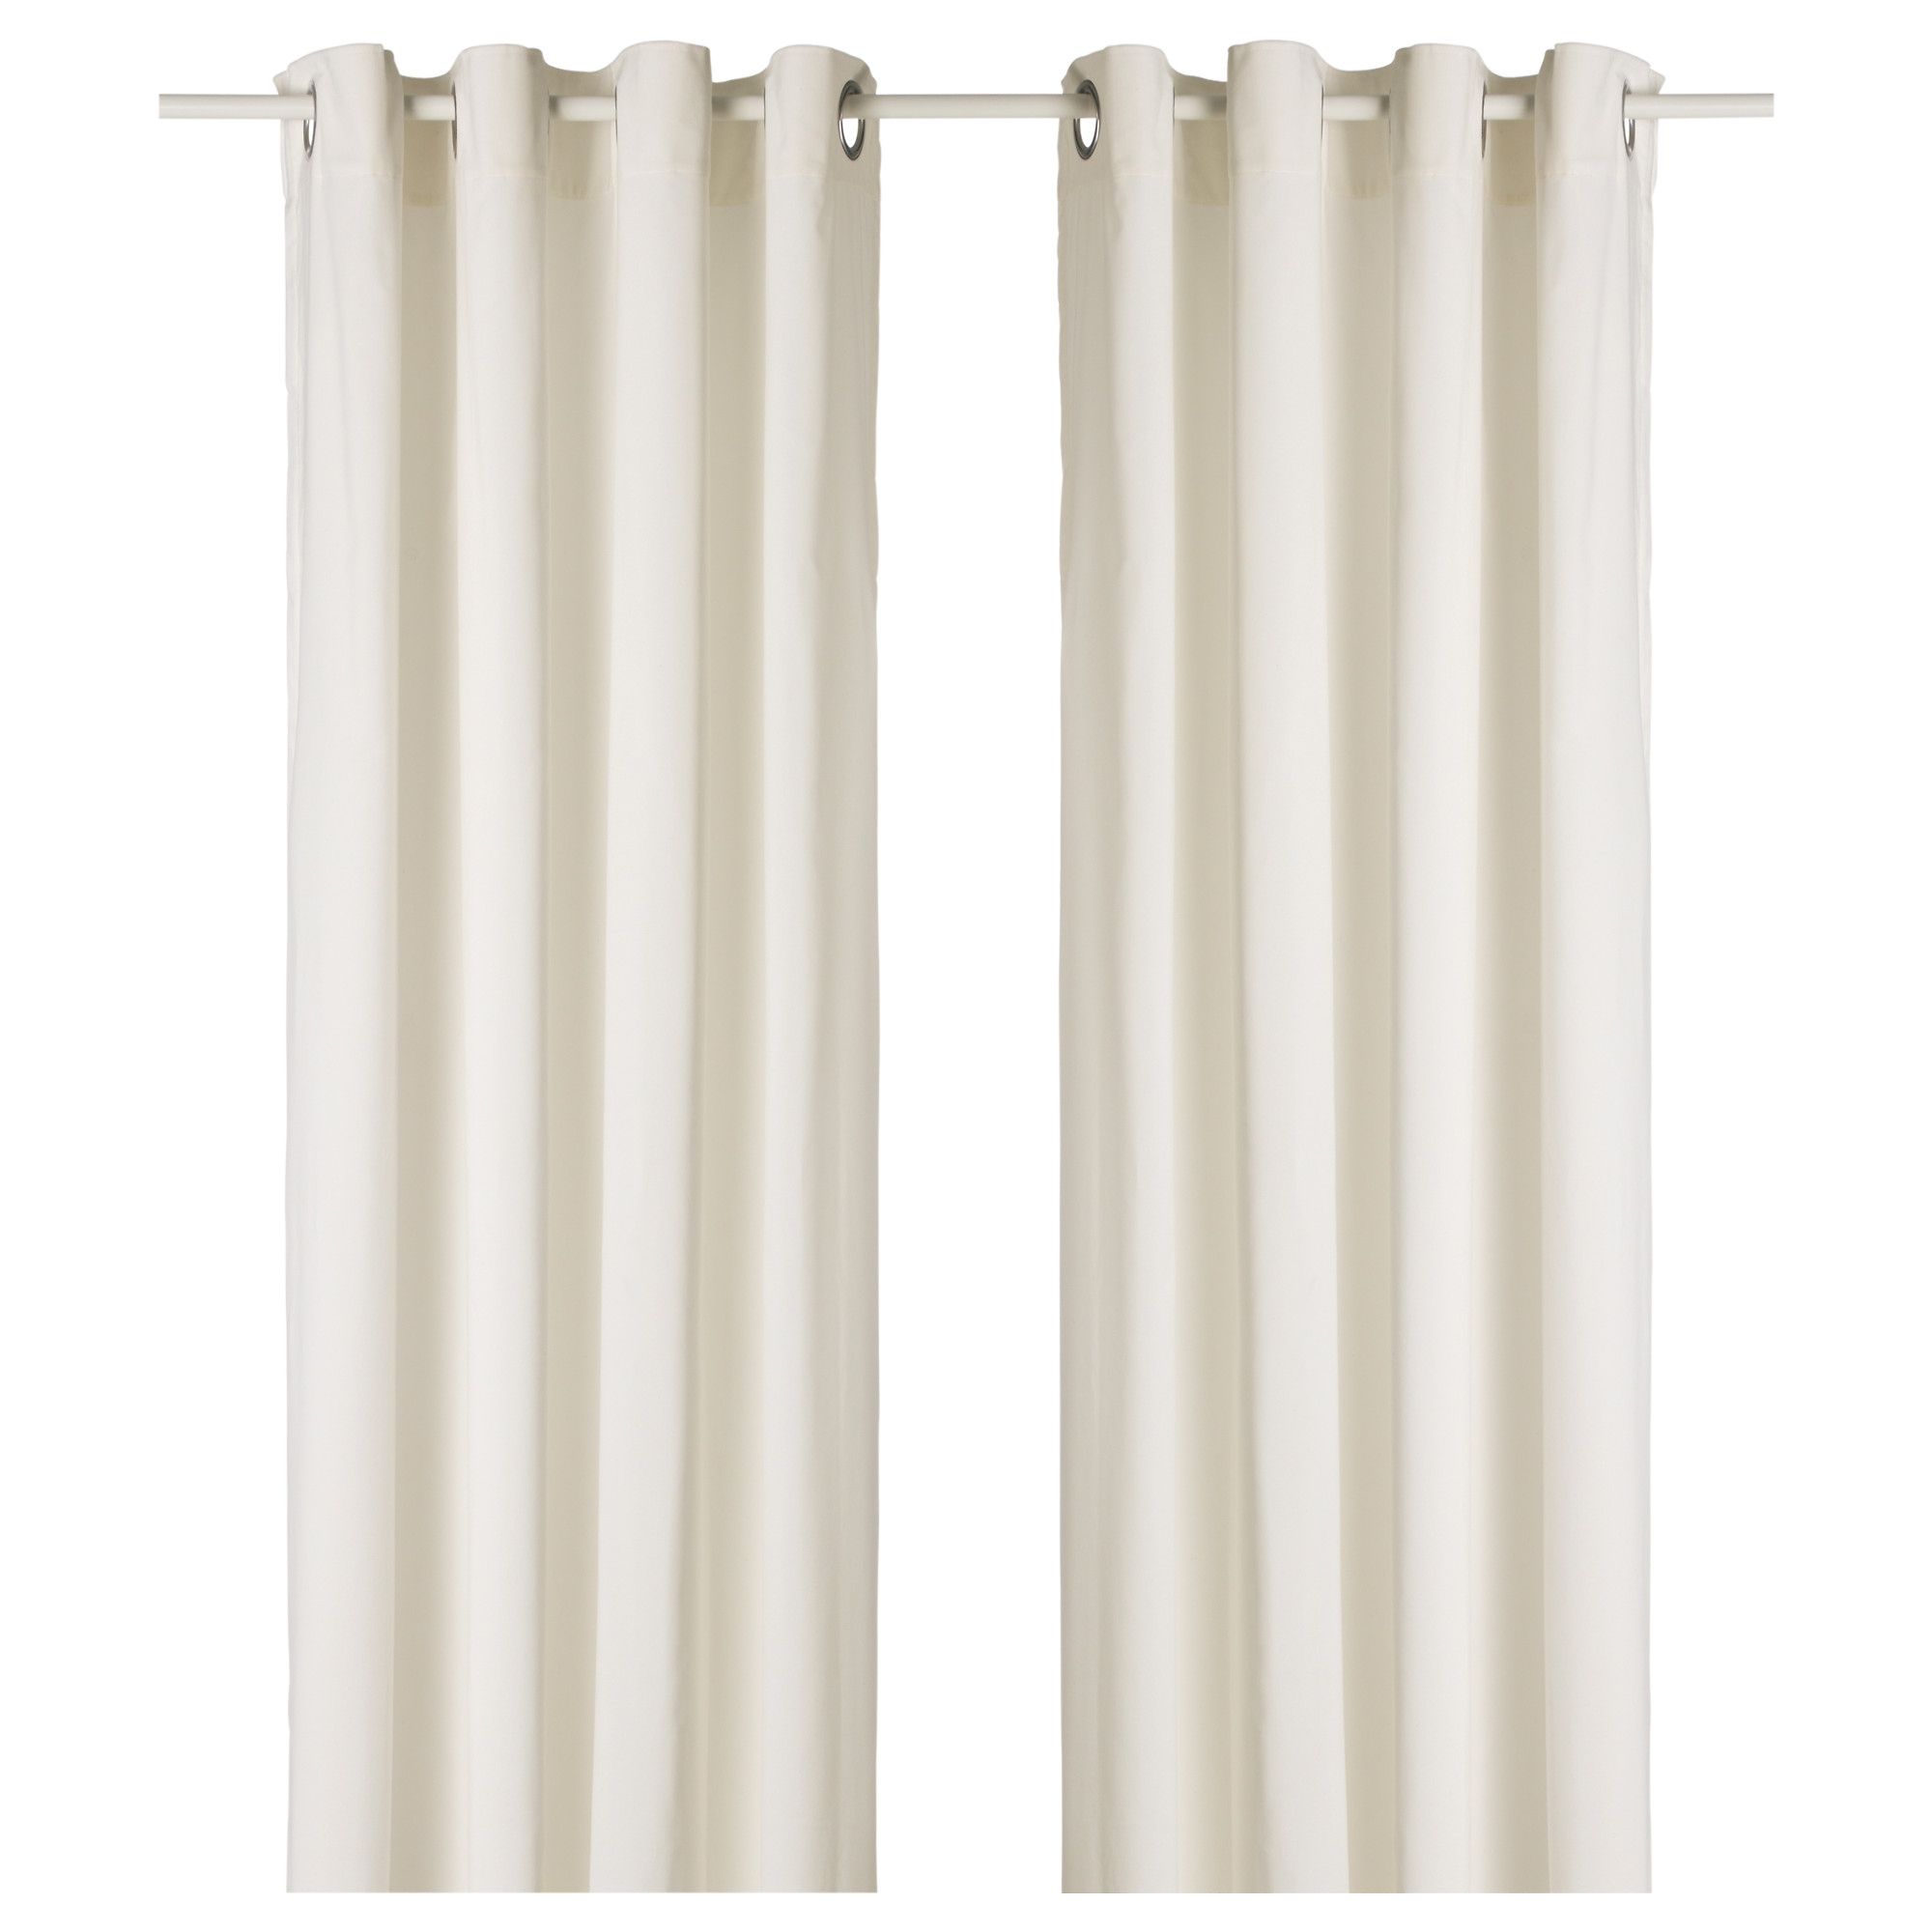 Curtains Living Room Bedroom Curtains Ikea Inside White Thick Curtains (View 1 of 15)